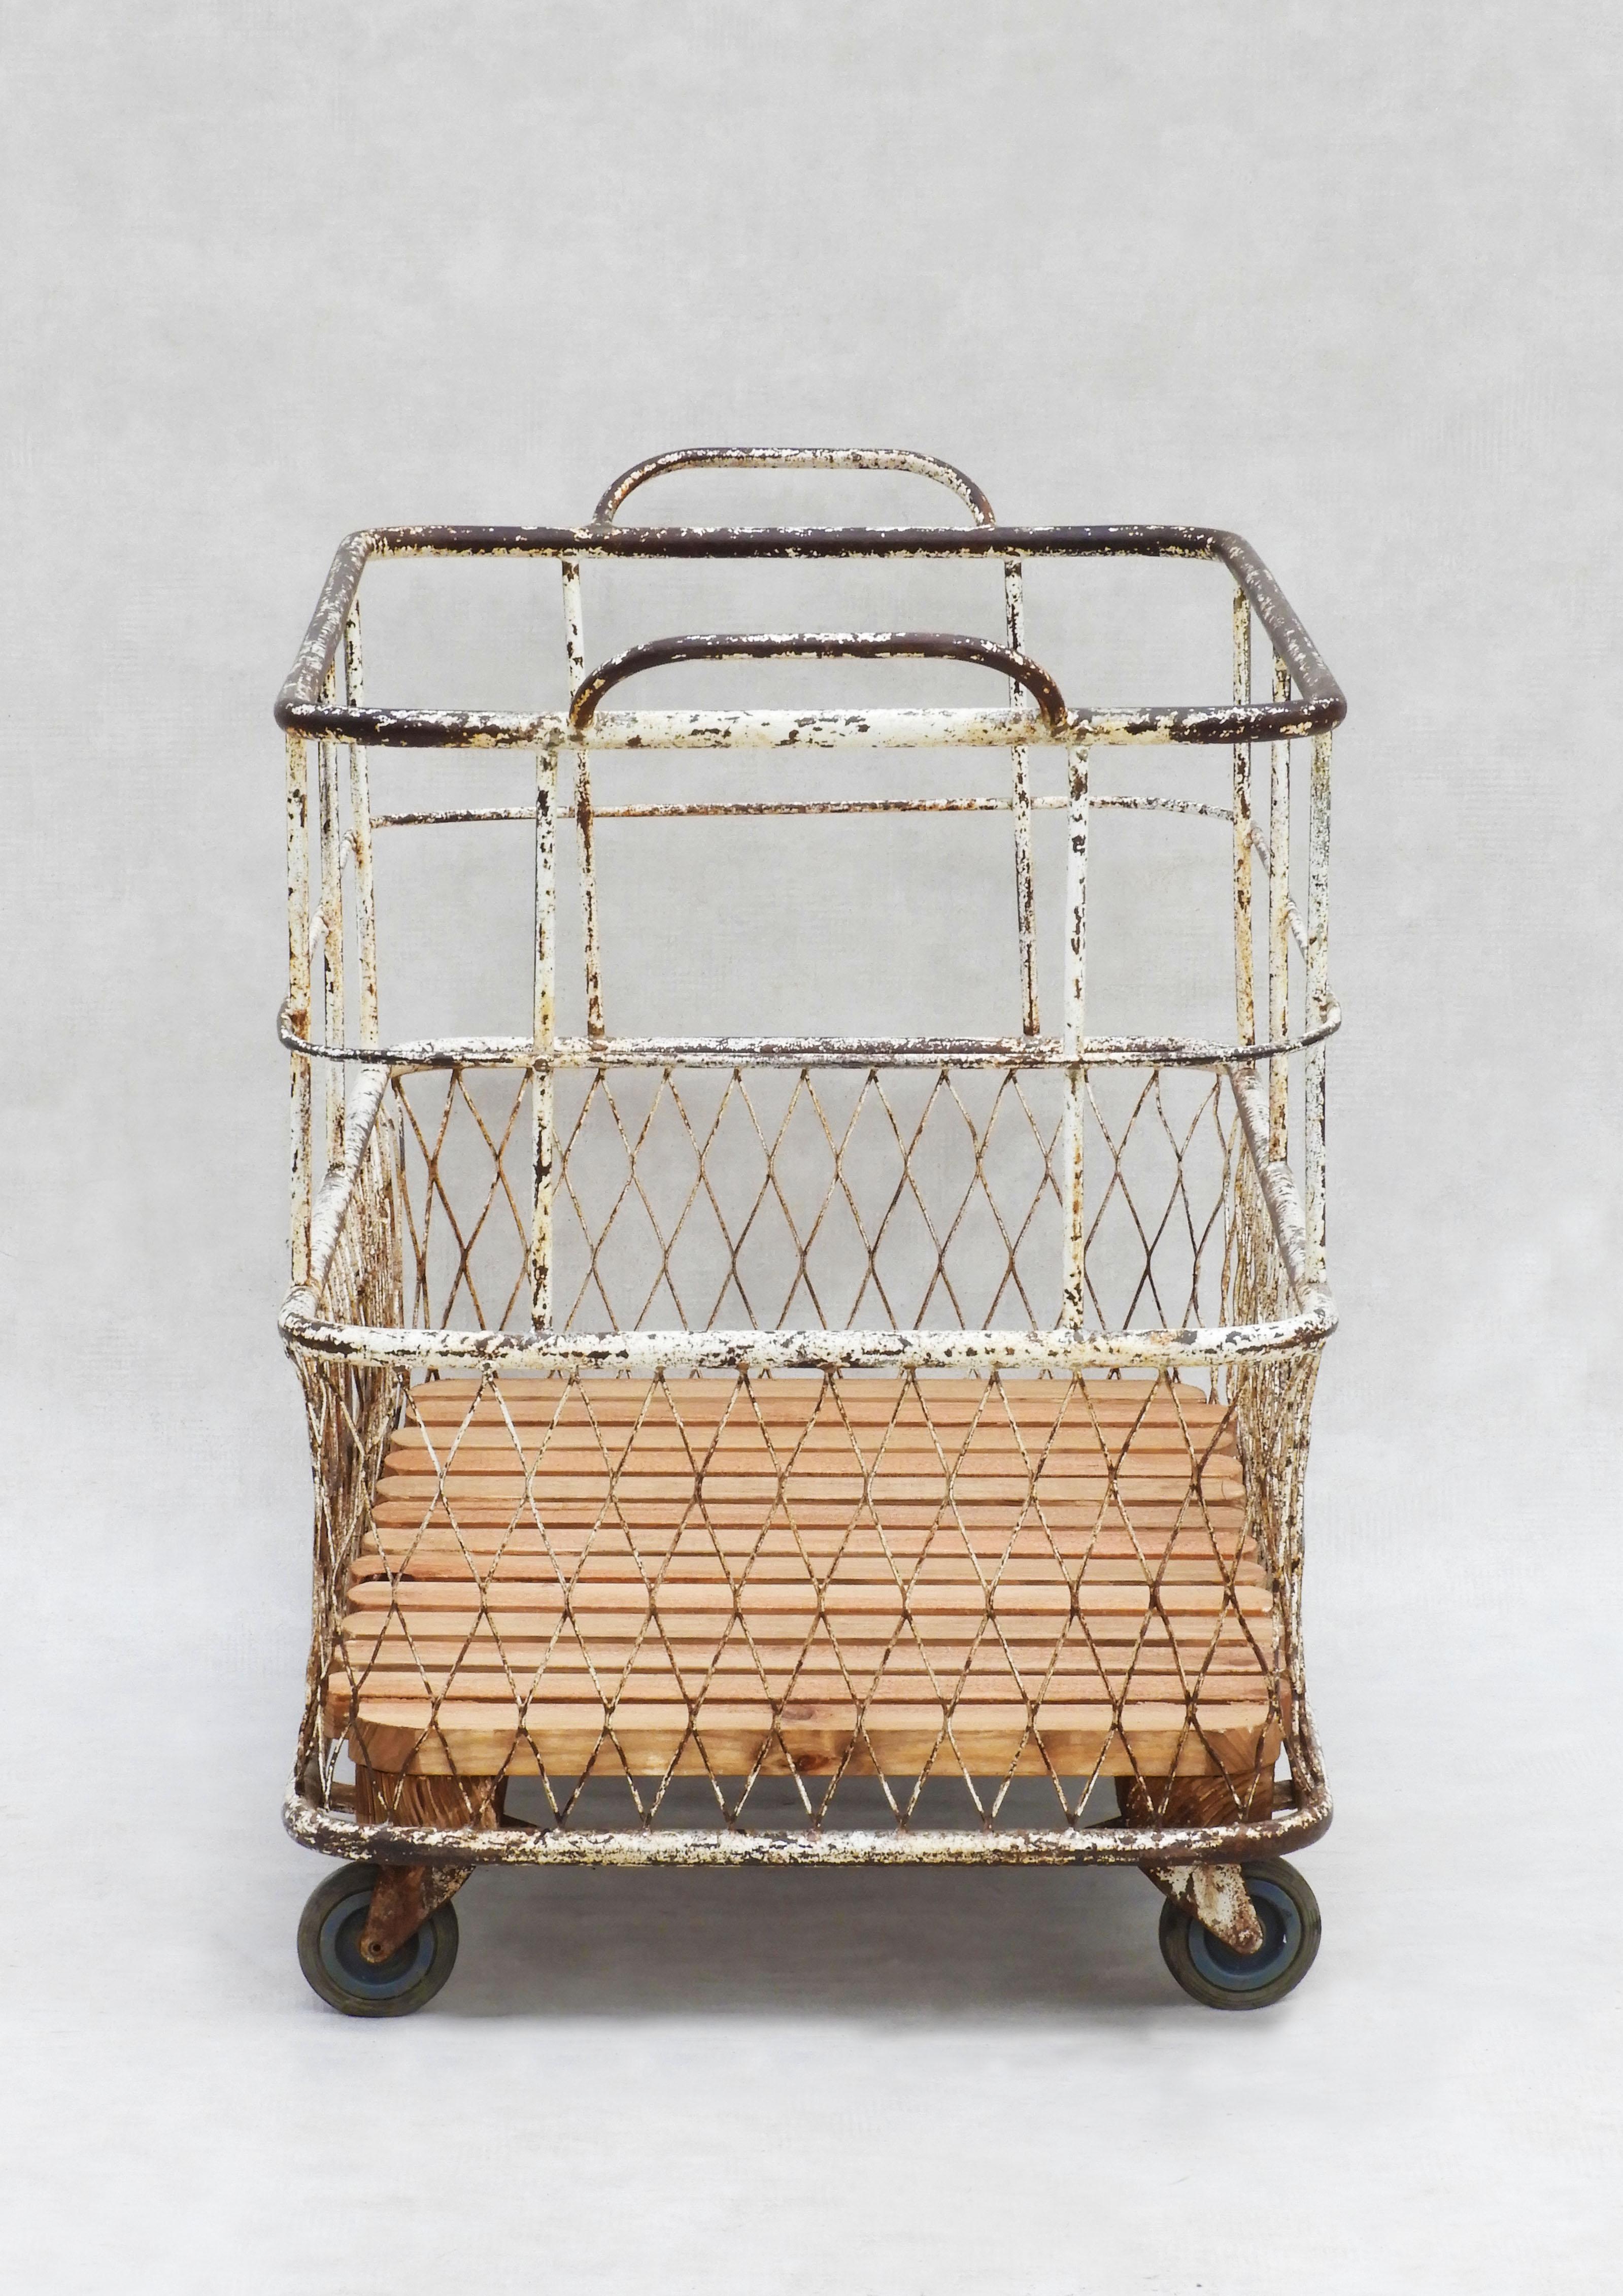 French Mid Century Industrial Boulangerie Trolley Basket Cart C1950 In Fair Condition For Sale In Trensacq, FR